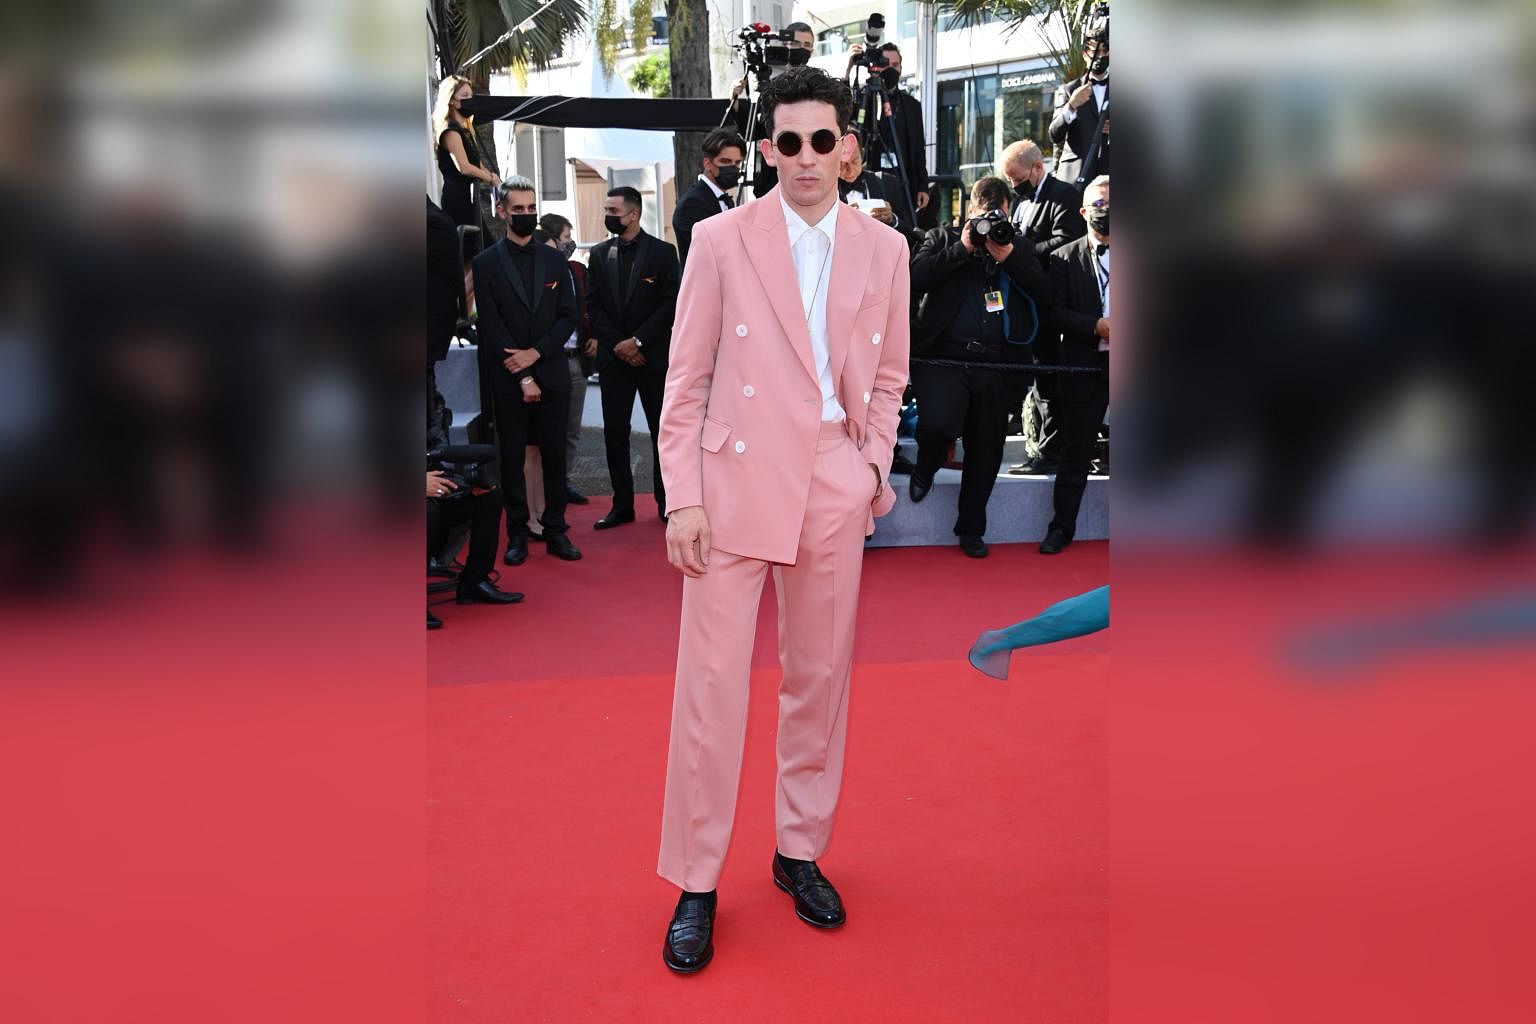 Spike Lee's Pink Louis Vuitton Suit Won Cannes Opening Night